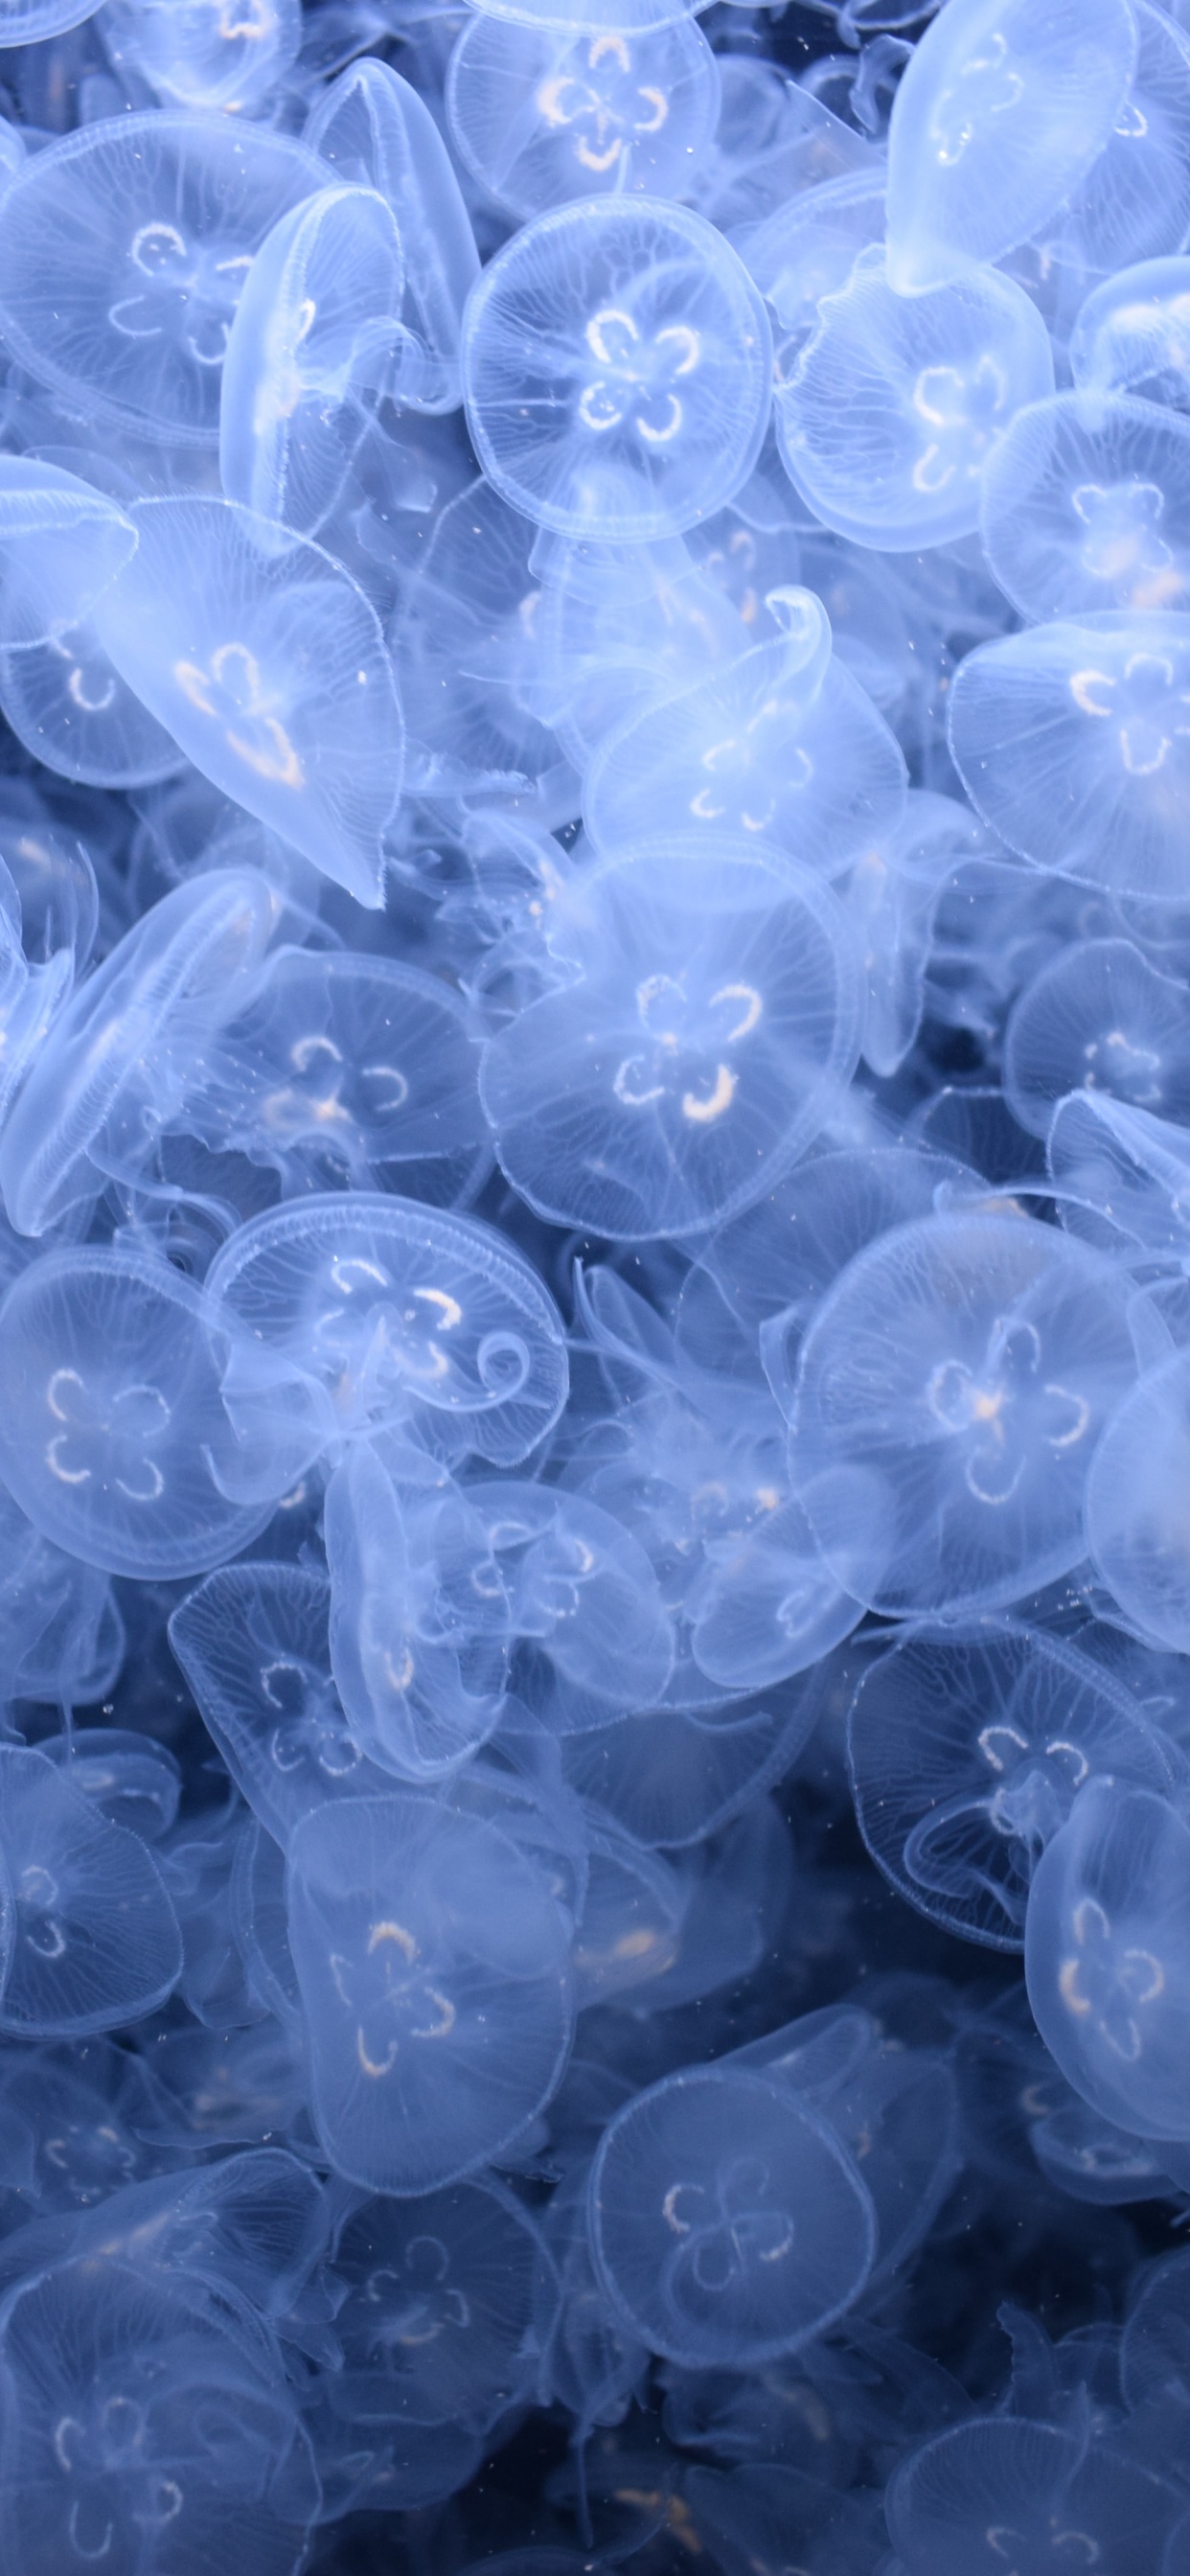 200+] Jellyfish Wallpapers | Wallpapers.com